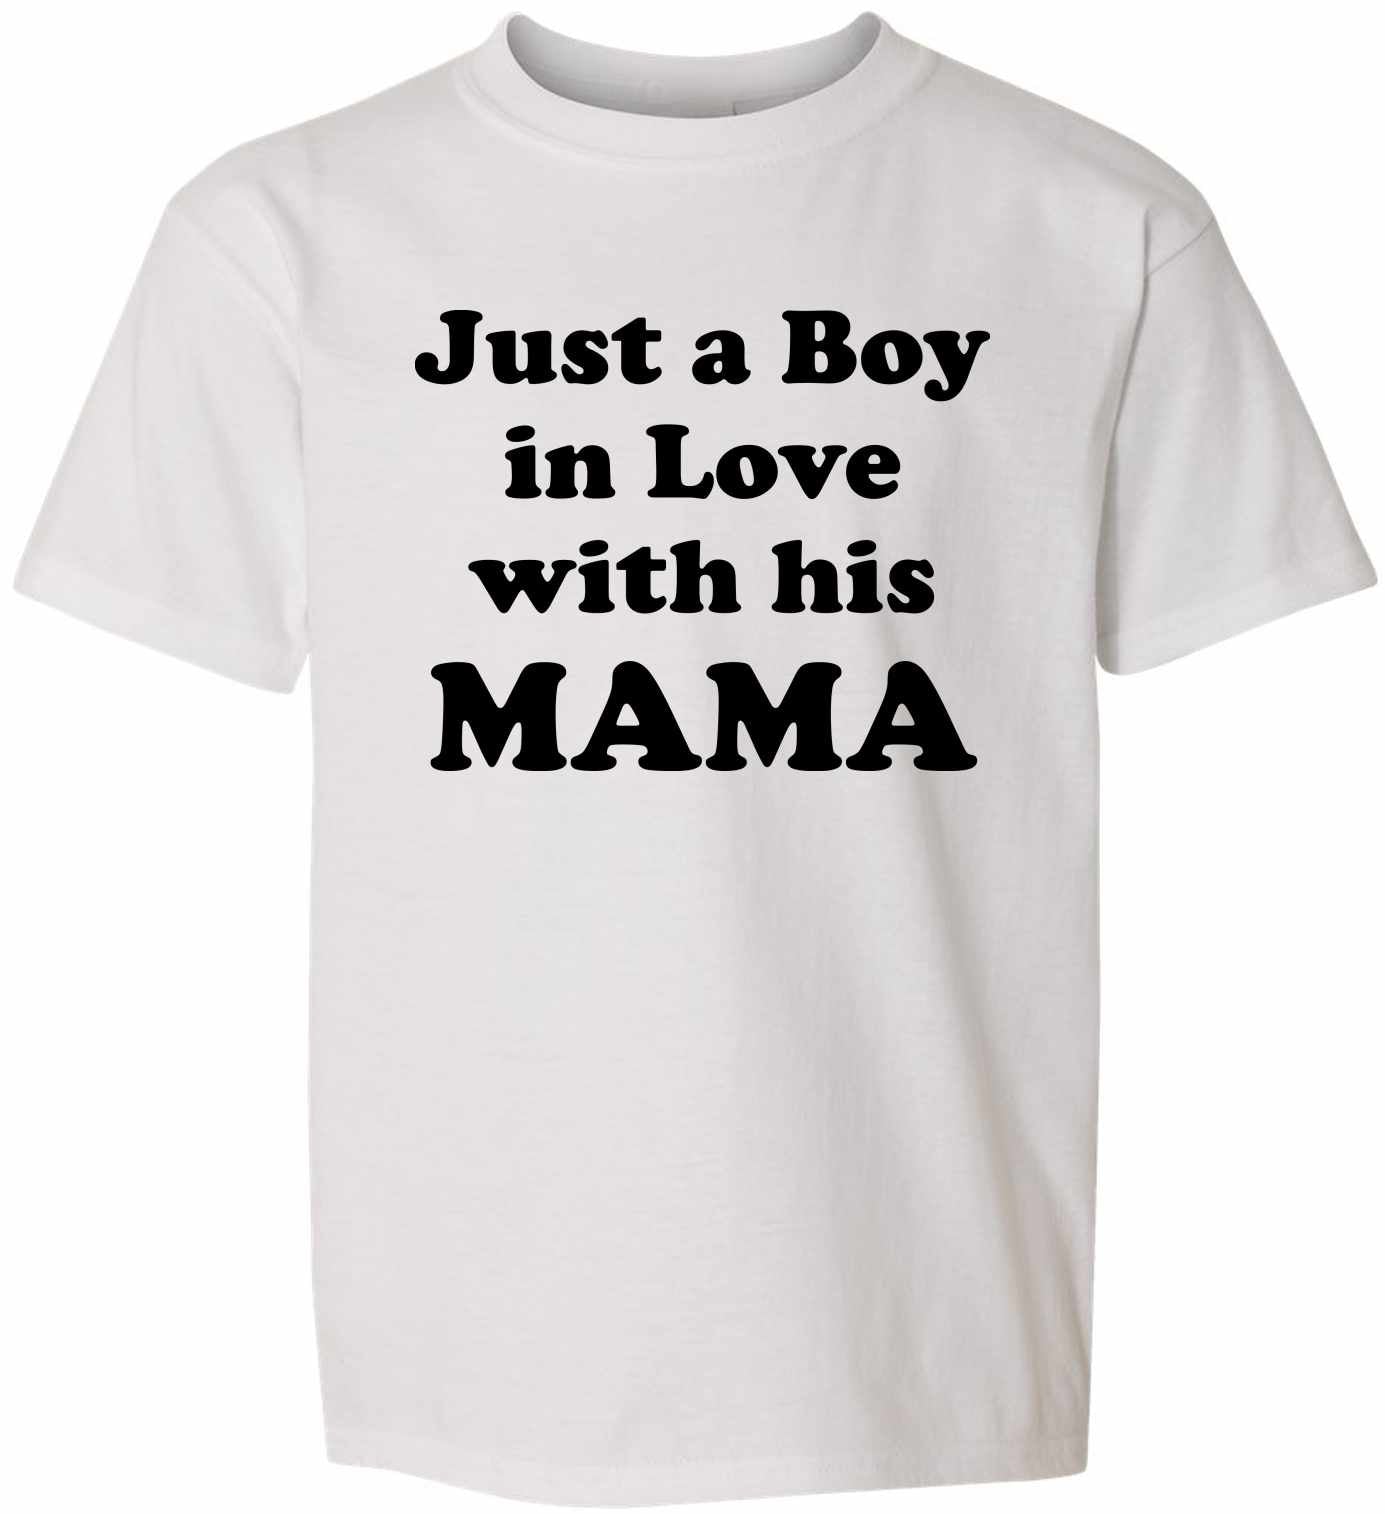 Just a Boy in Love with his MAMA on Kids T-Shirt (#1097-201)